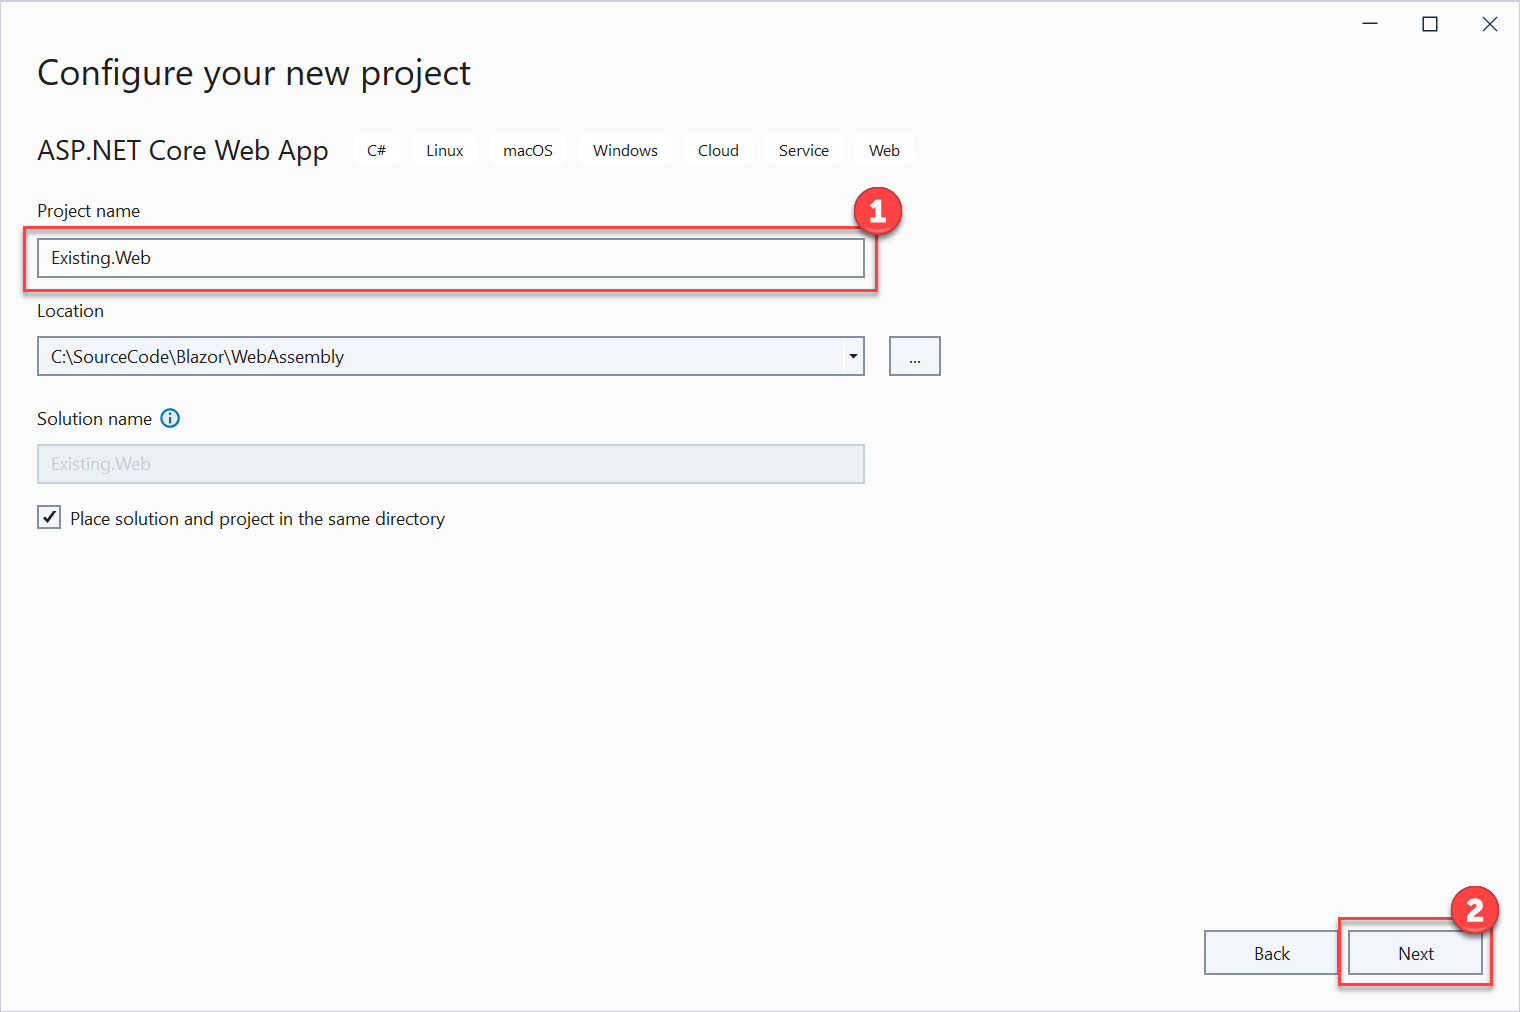 The Configure your new project dialog displays with the project name set to Existing.Web and the next button is selected.